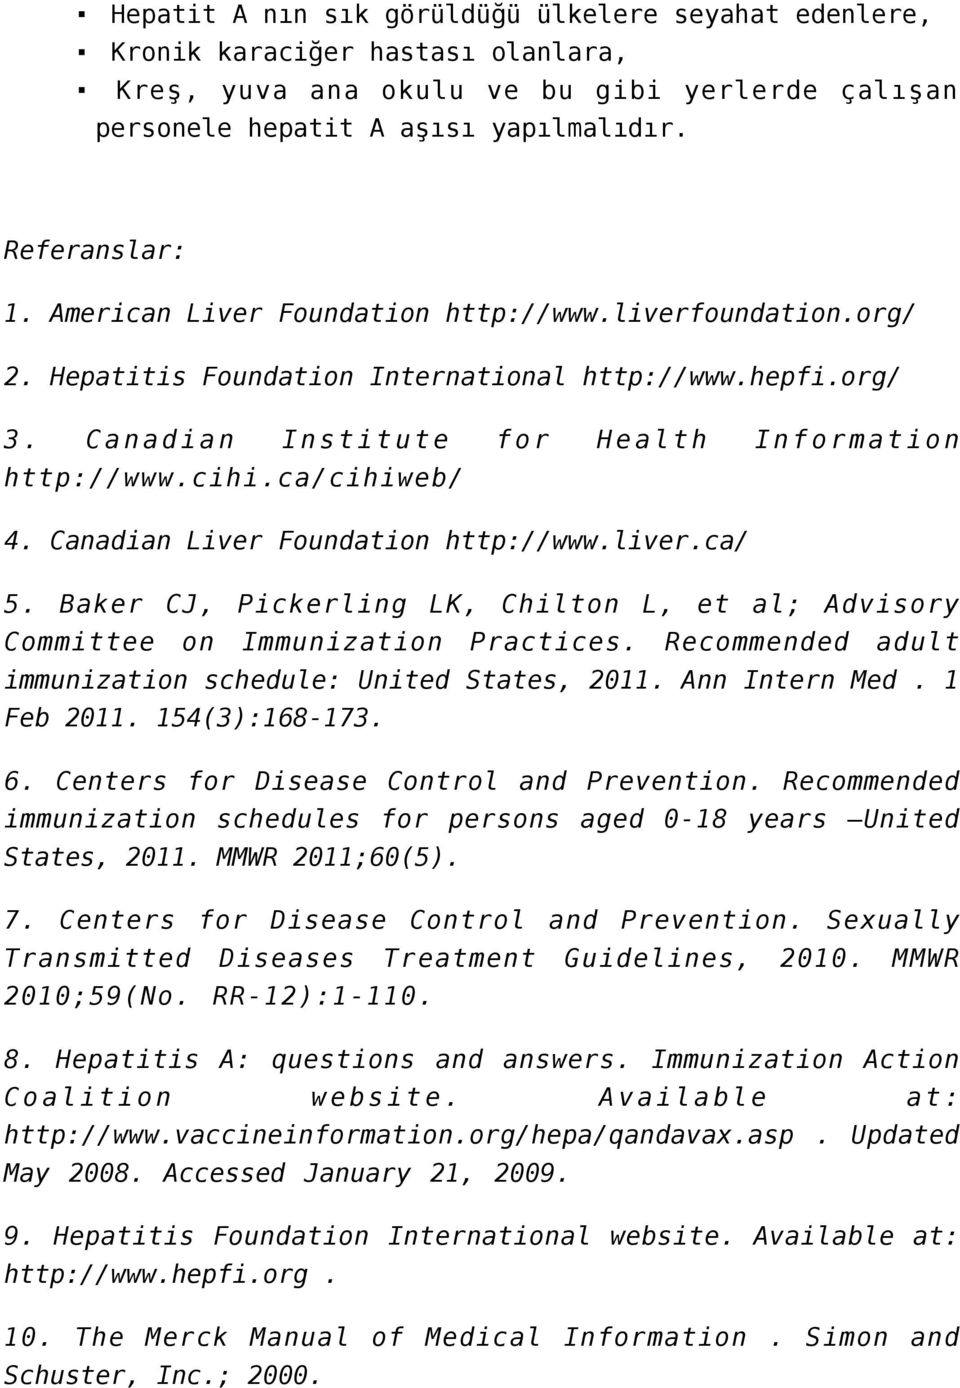 Canadian Liver Foundation http://www.liver.ca/ 5. Baker CJ, Pickerling LK, Chilton L, et al; Advisory Committee on Immunization Practices. Recommended adult immunization schedule: United States, 2011.